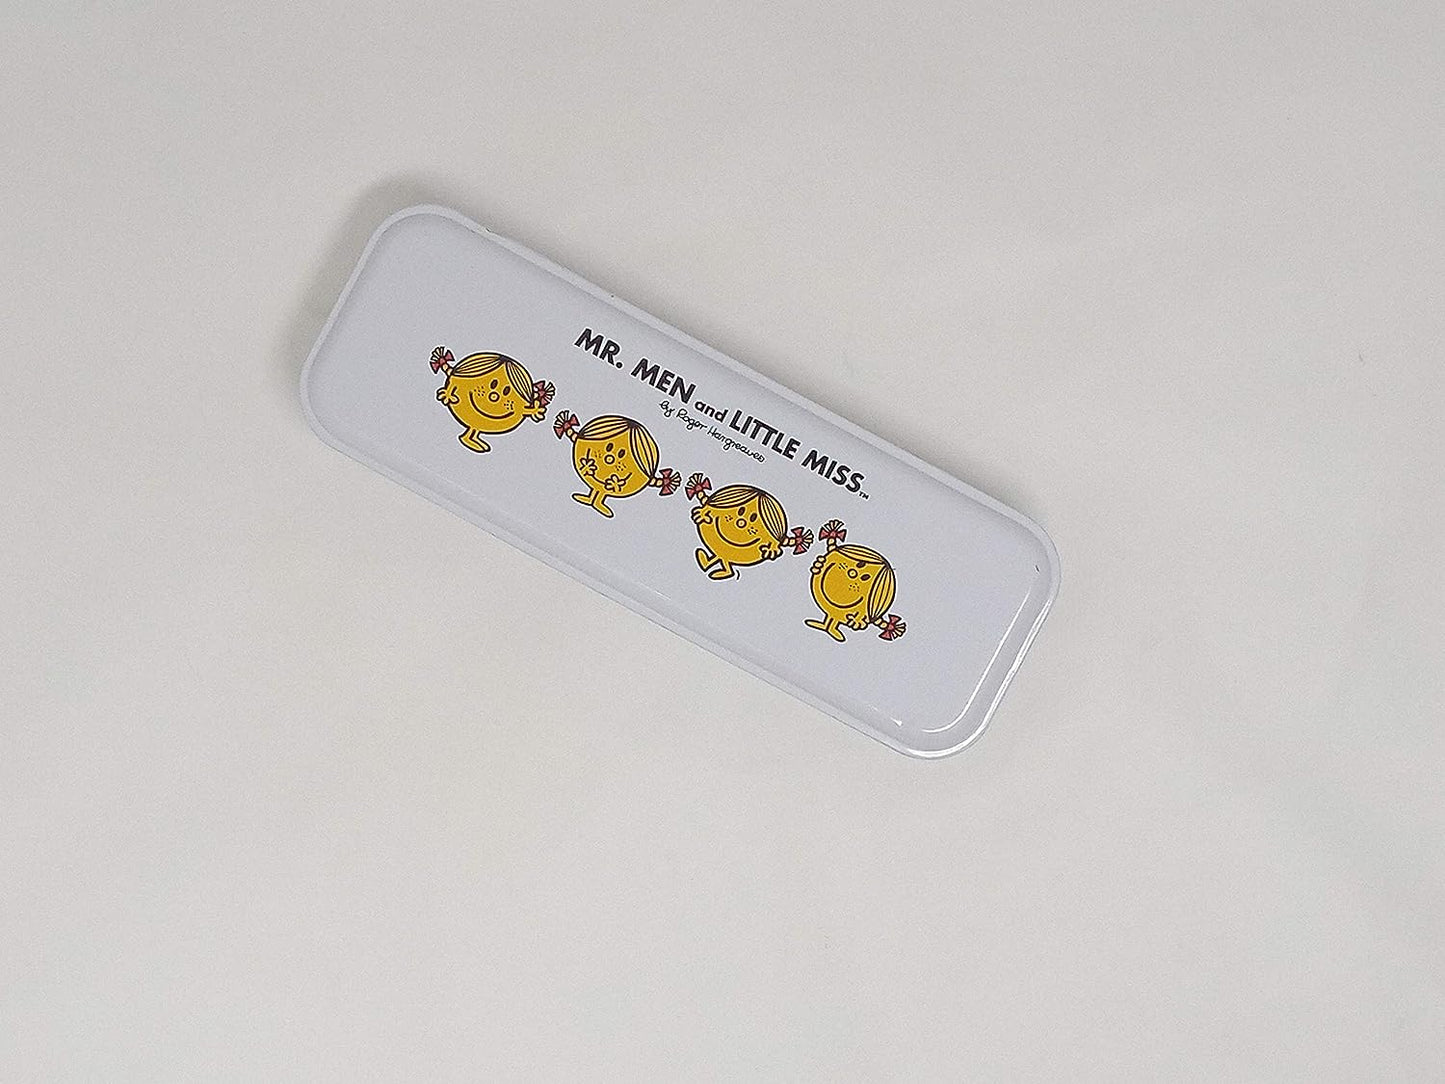 Ondesk Essentials Tin Mr. Men & Little Miss Pencil Pouch | Large Pencil Pen Case with Zipper Closure | Student School Supplies | Office Stationery Pen Storage Bag | White, Pack of 1